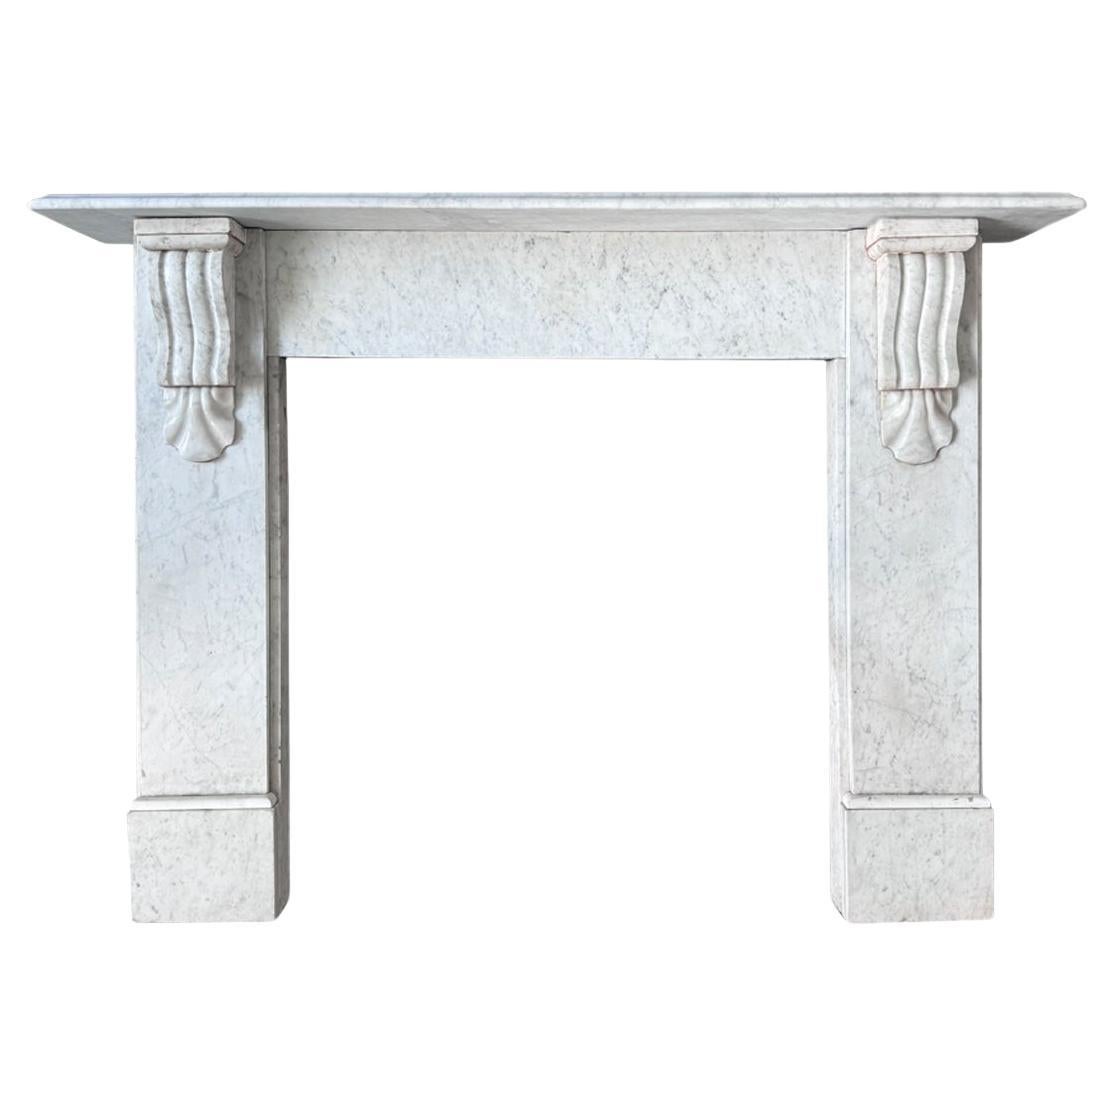 Reclaimed Victorian Corbelled Carrara marble fireplace surround For Sale